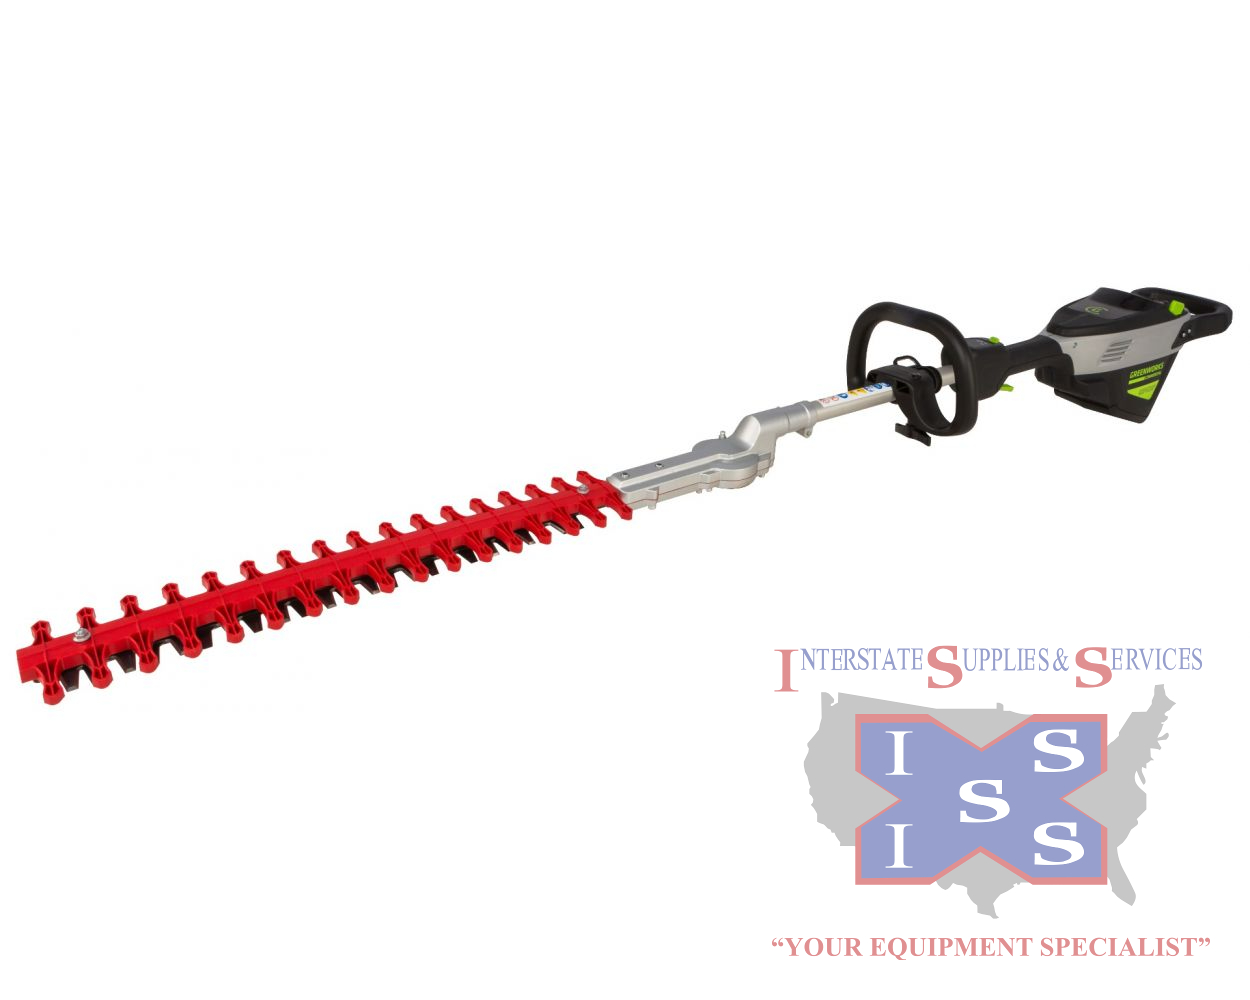 82PH20F 82-Volt Pole Hedge Trimmer (Tool Only)